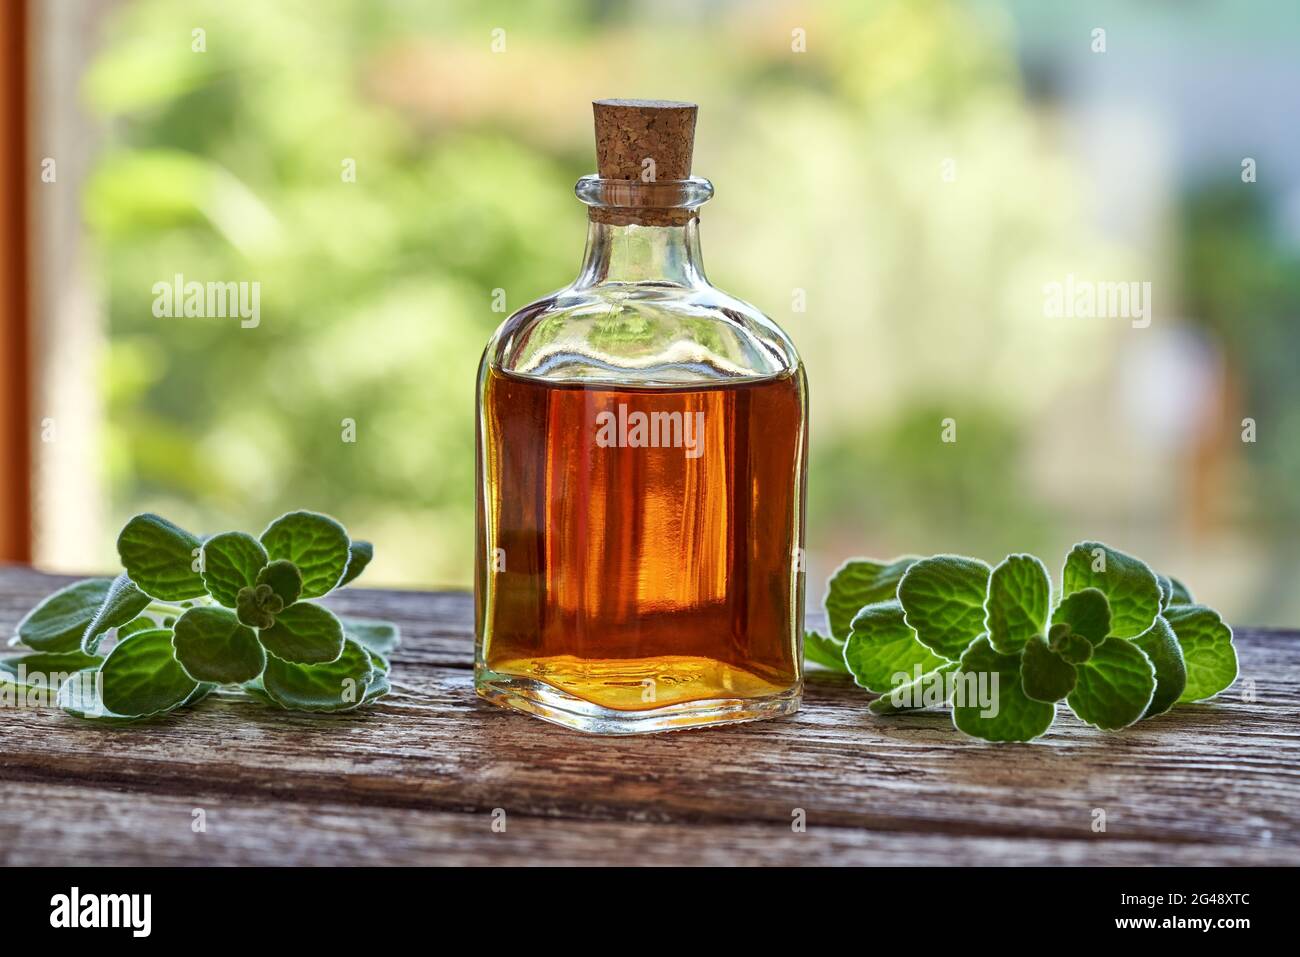 A bottle of silver spurflower tincture with fresh Plectranthus argentatus leaves. Alternative medicine or naturopathy. Stock Photo